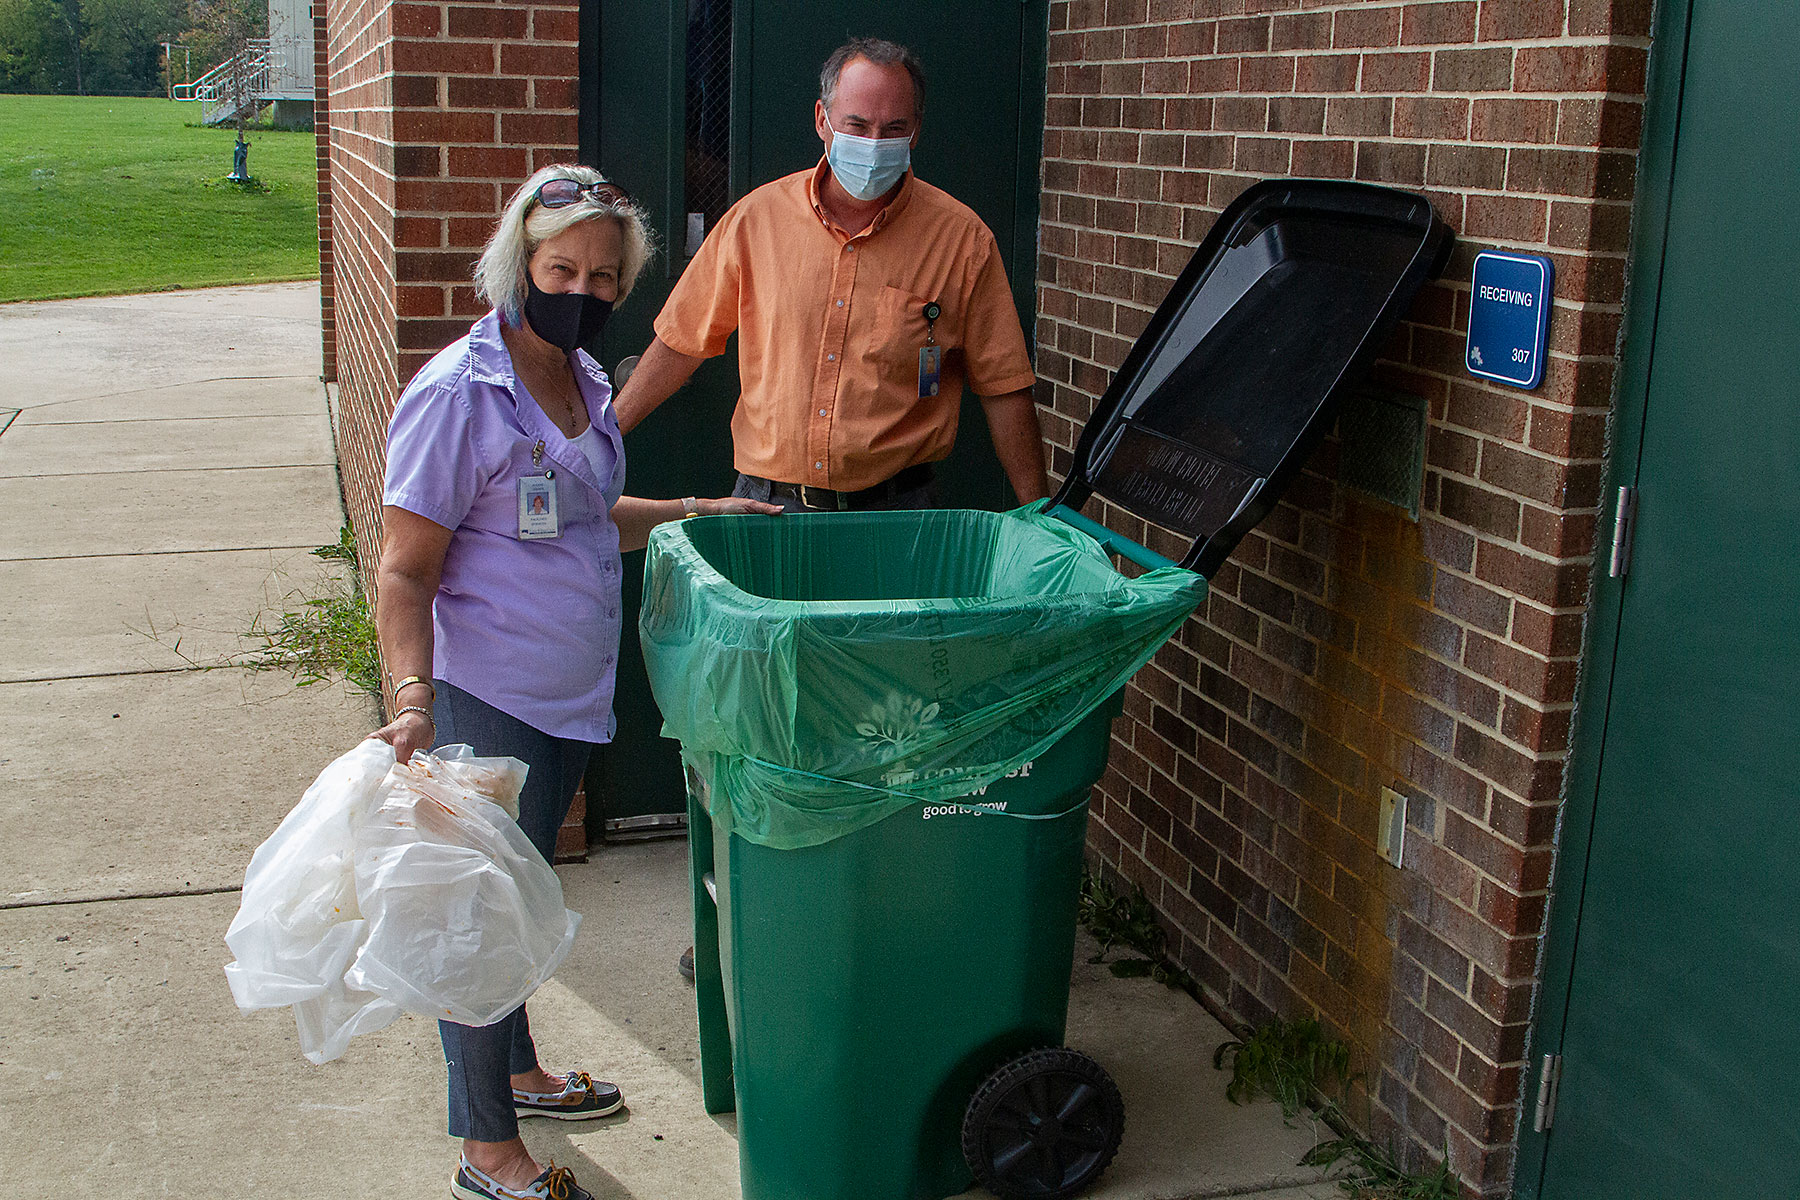 Two people near a compost bag at a school